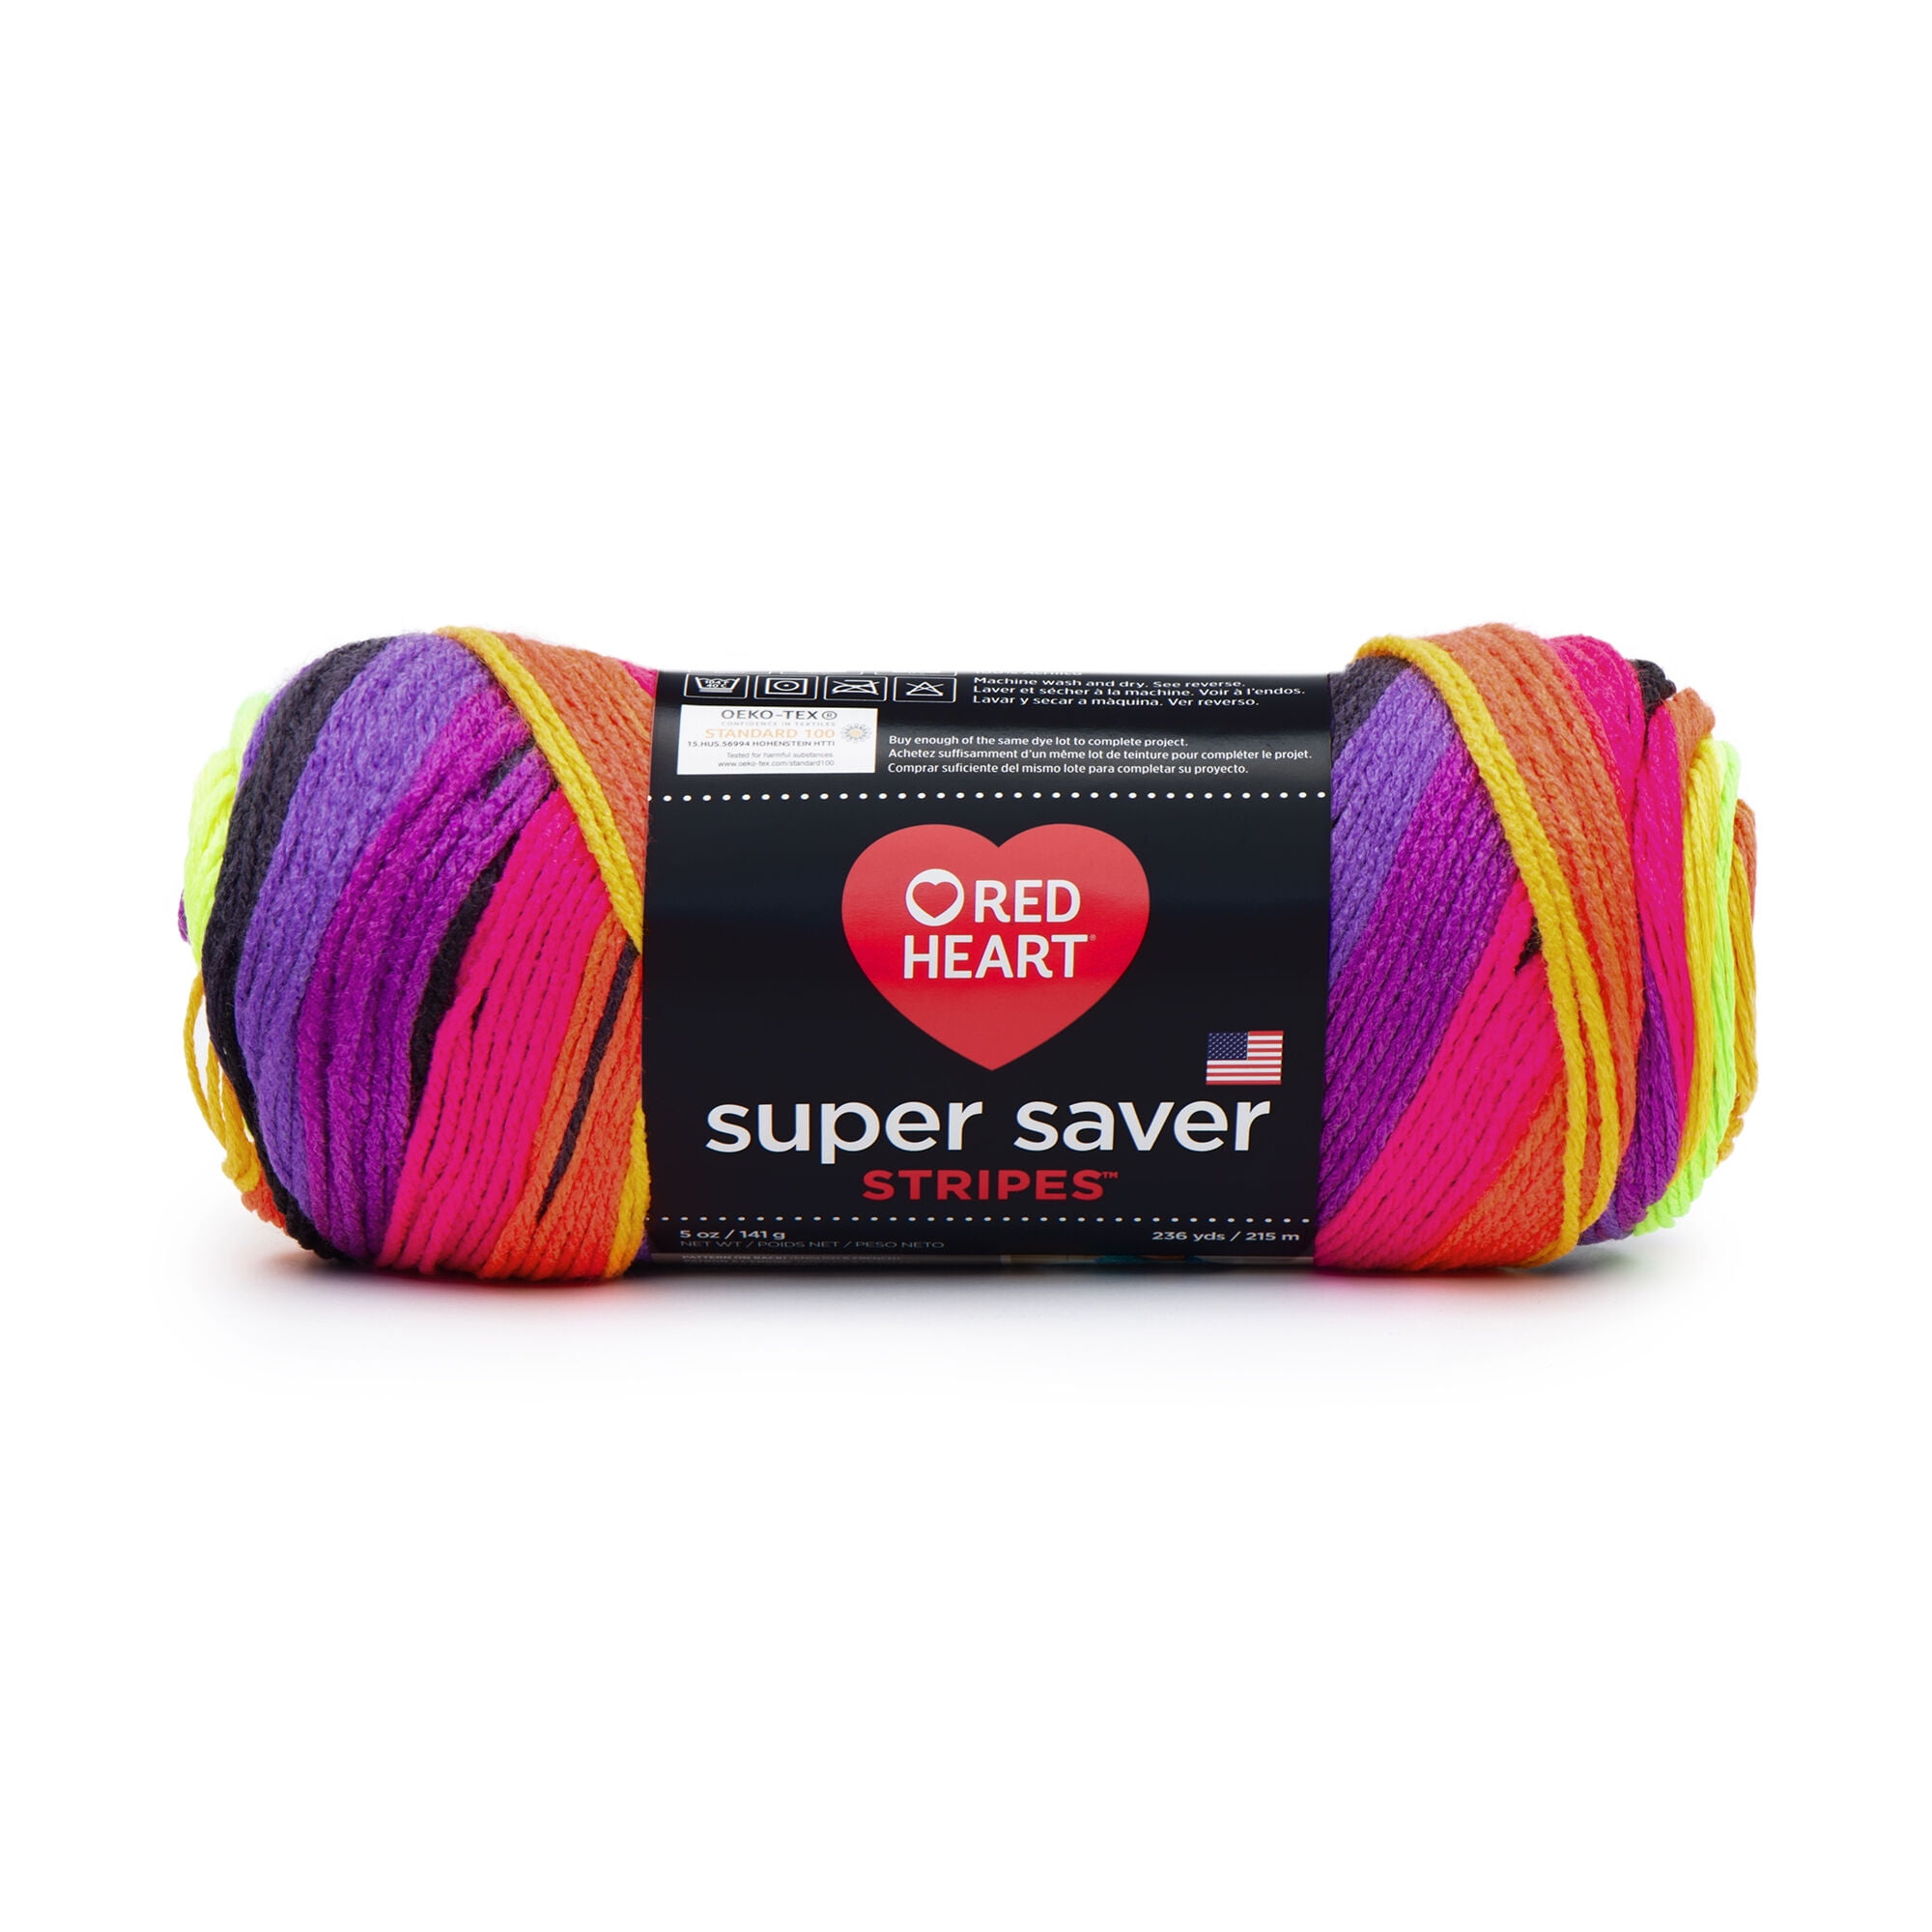 Red Heart Super Saver Yarn-Blacklight, 1 count - Fry's Food Stores